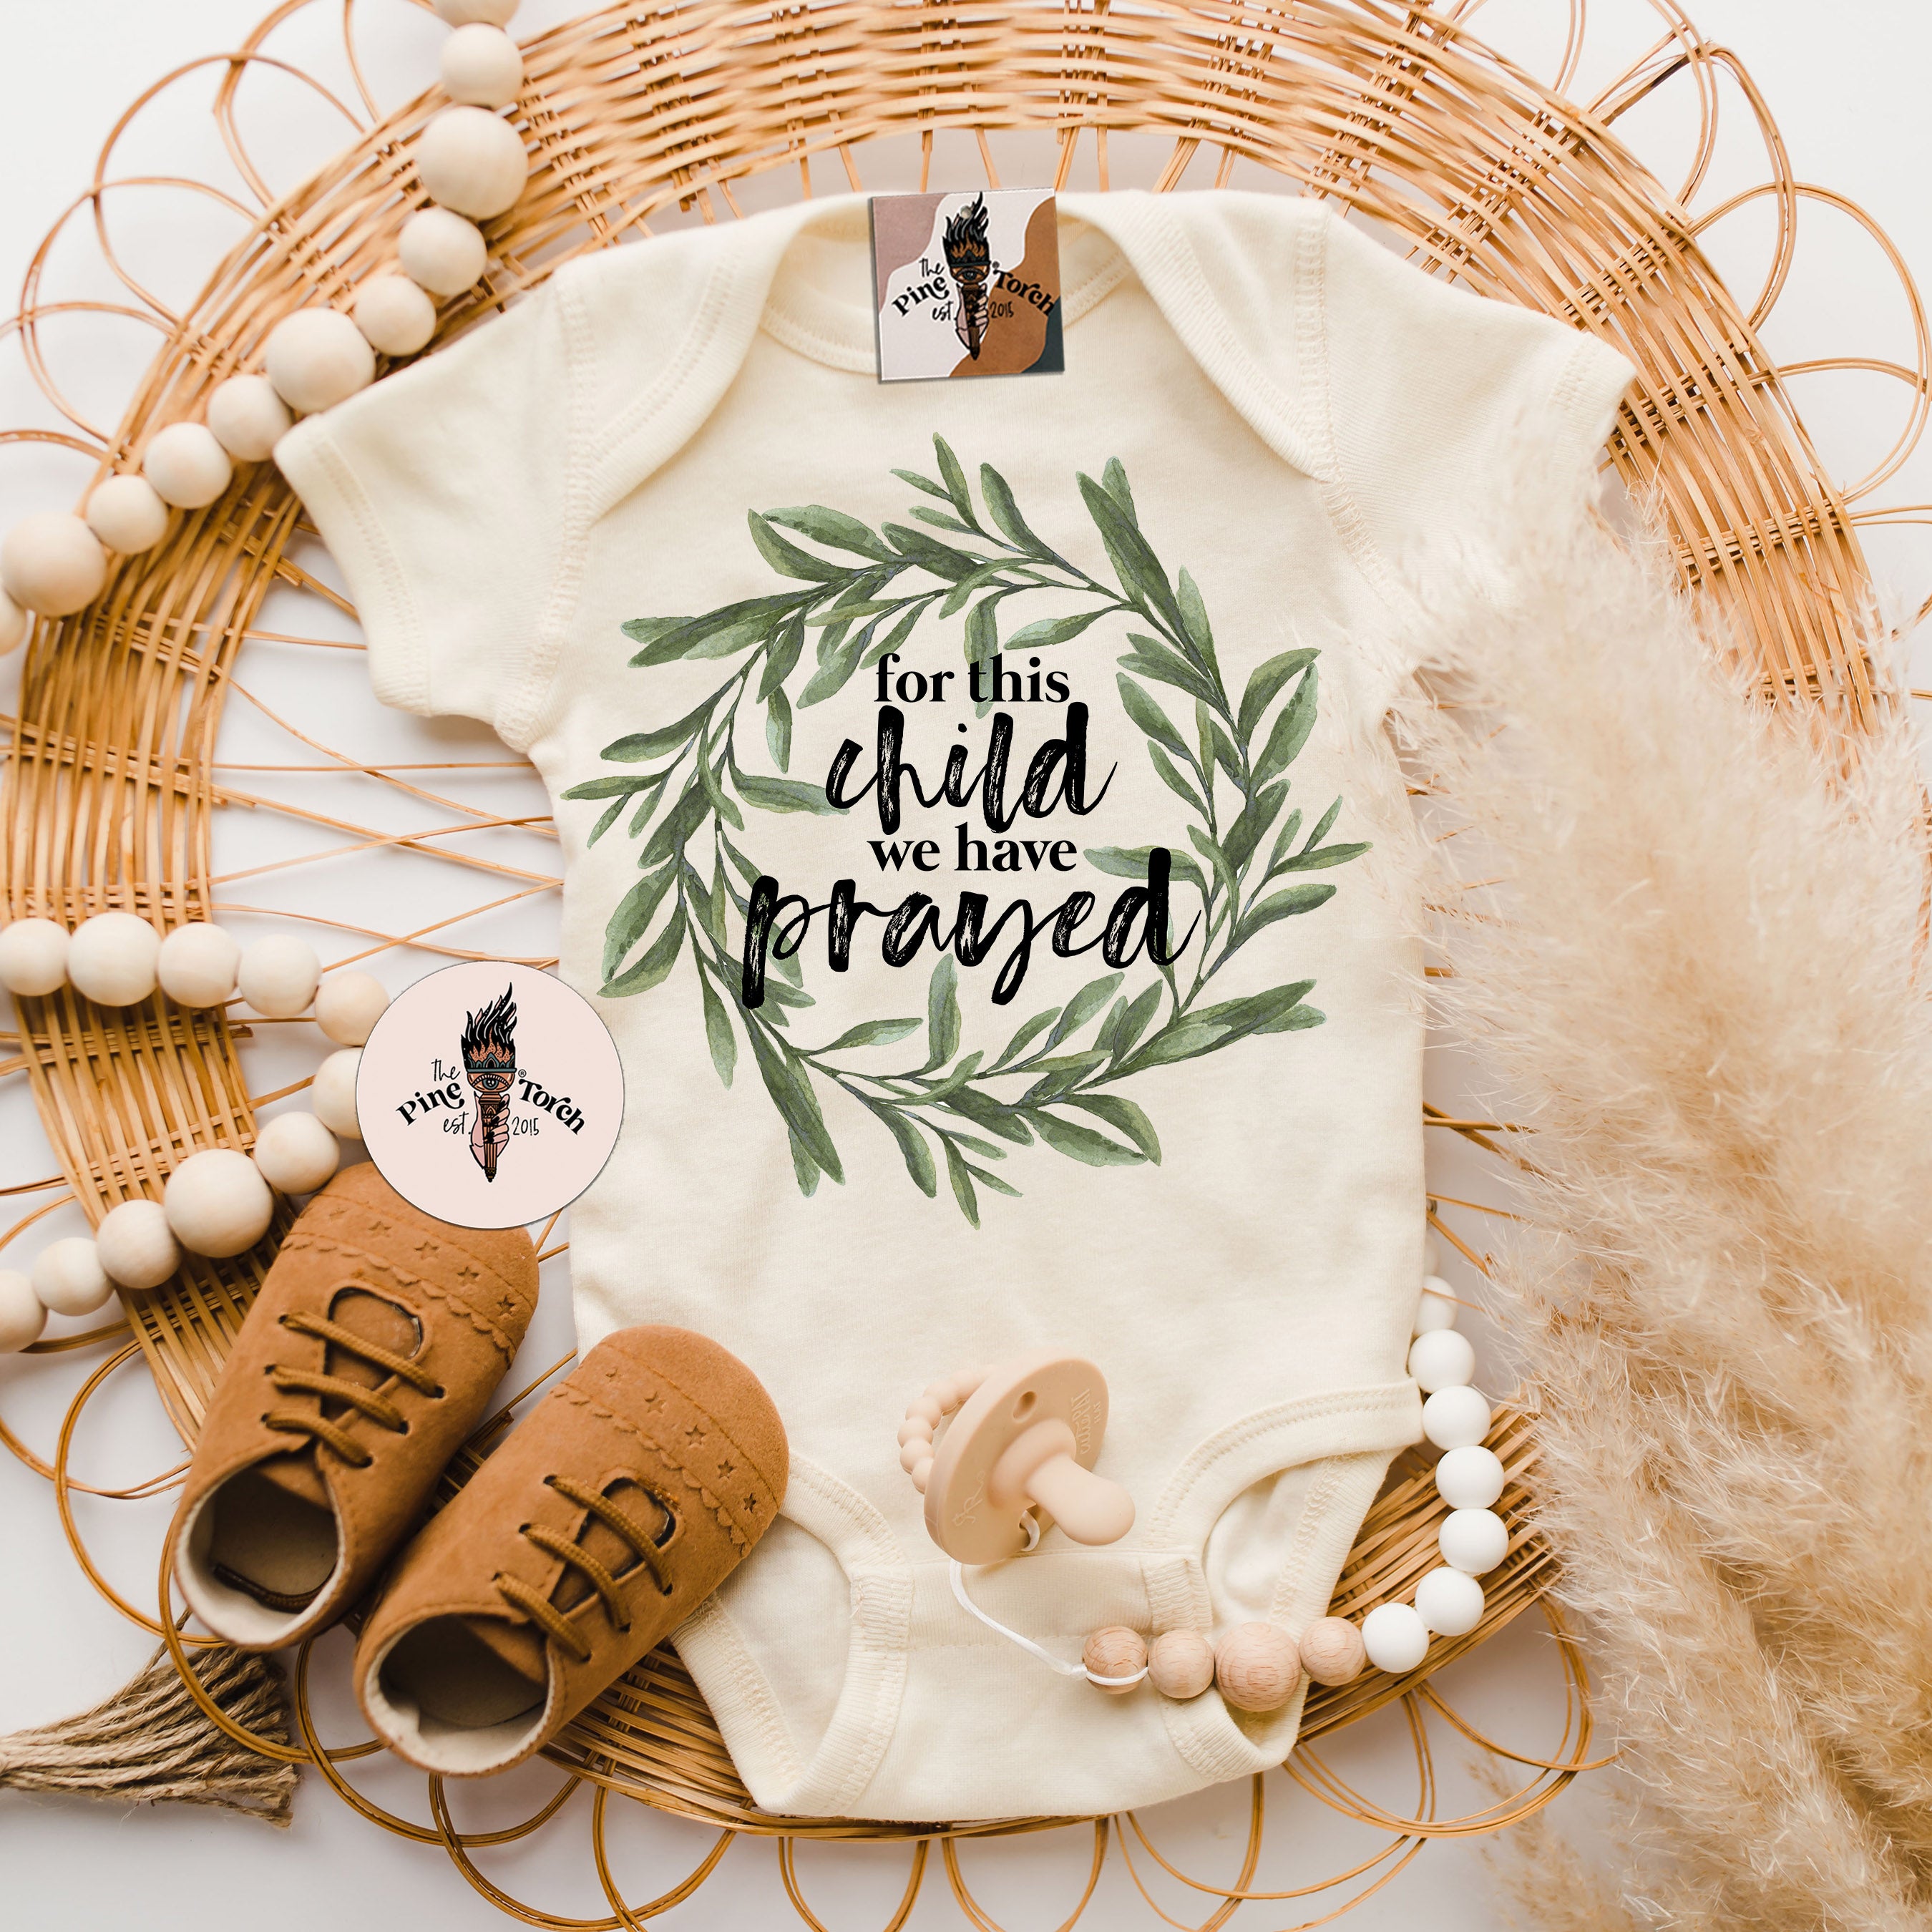 « FOR THIS CHILD WE HAVE PRAYED » BODYSUIT